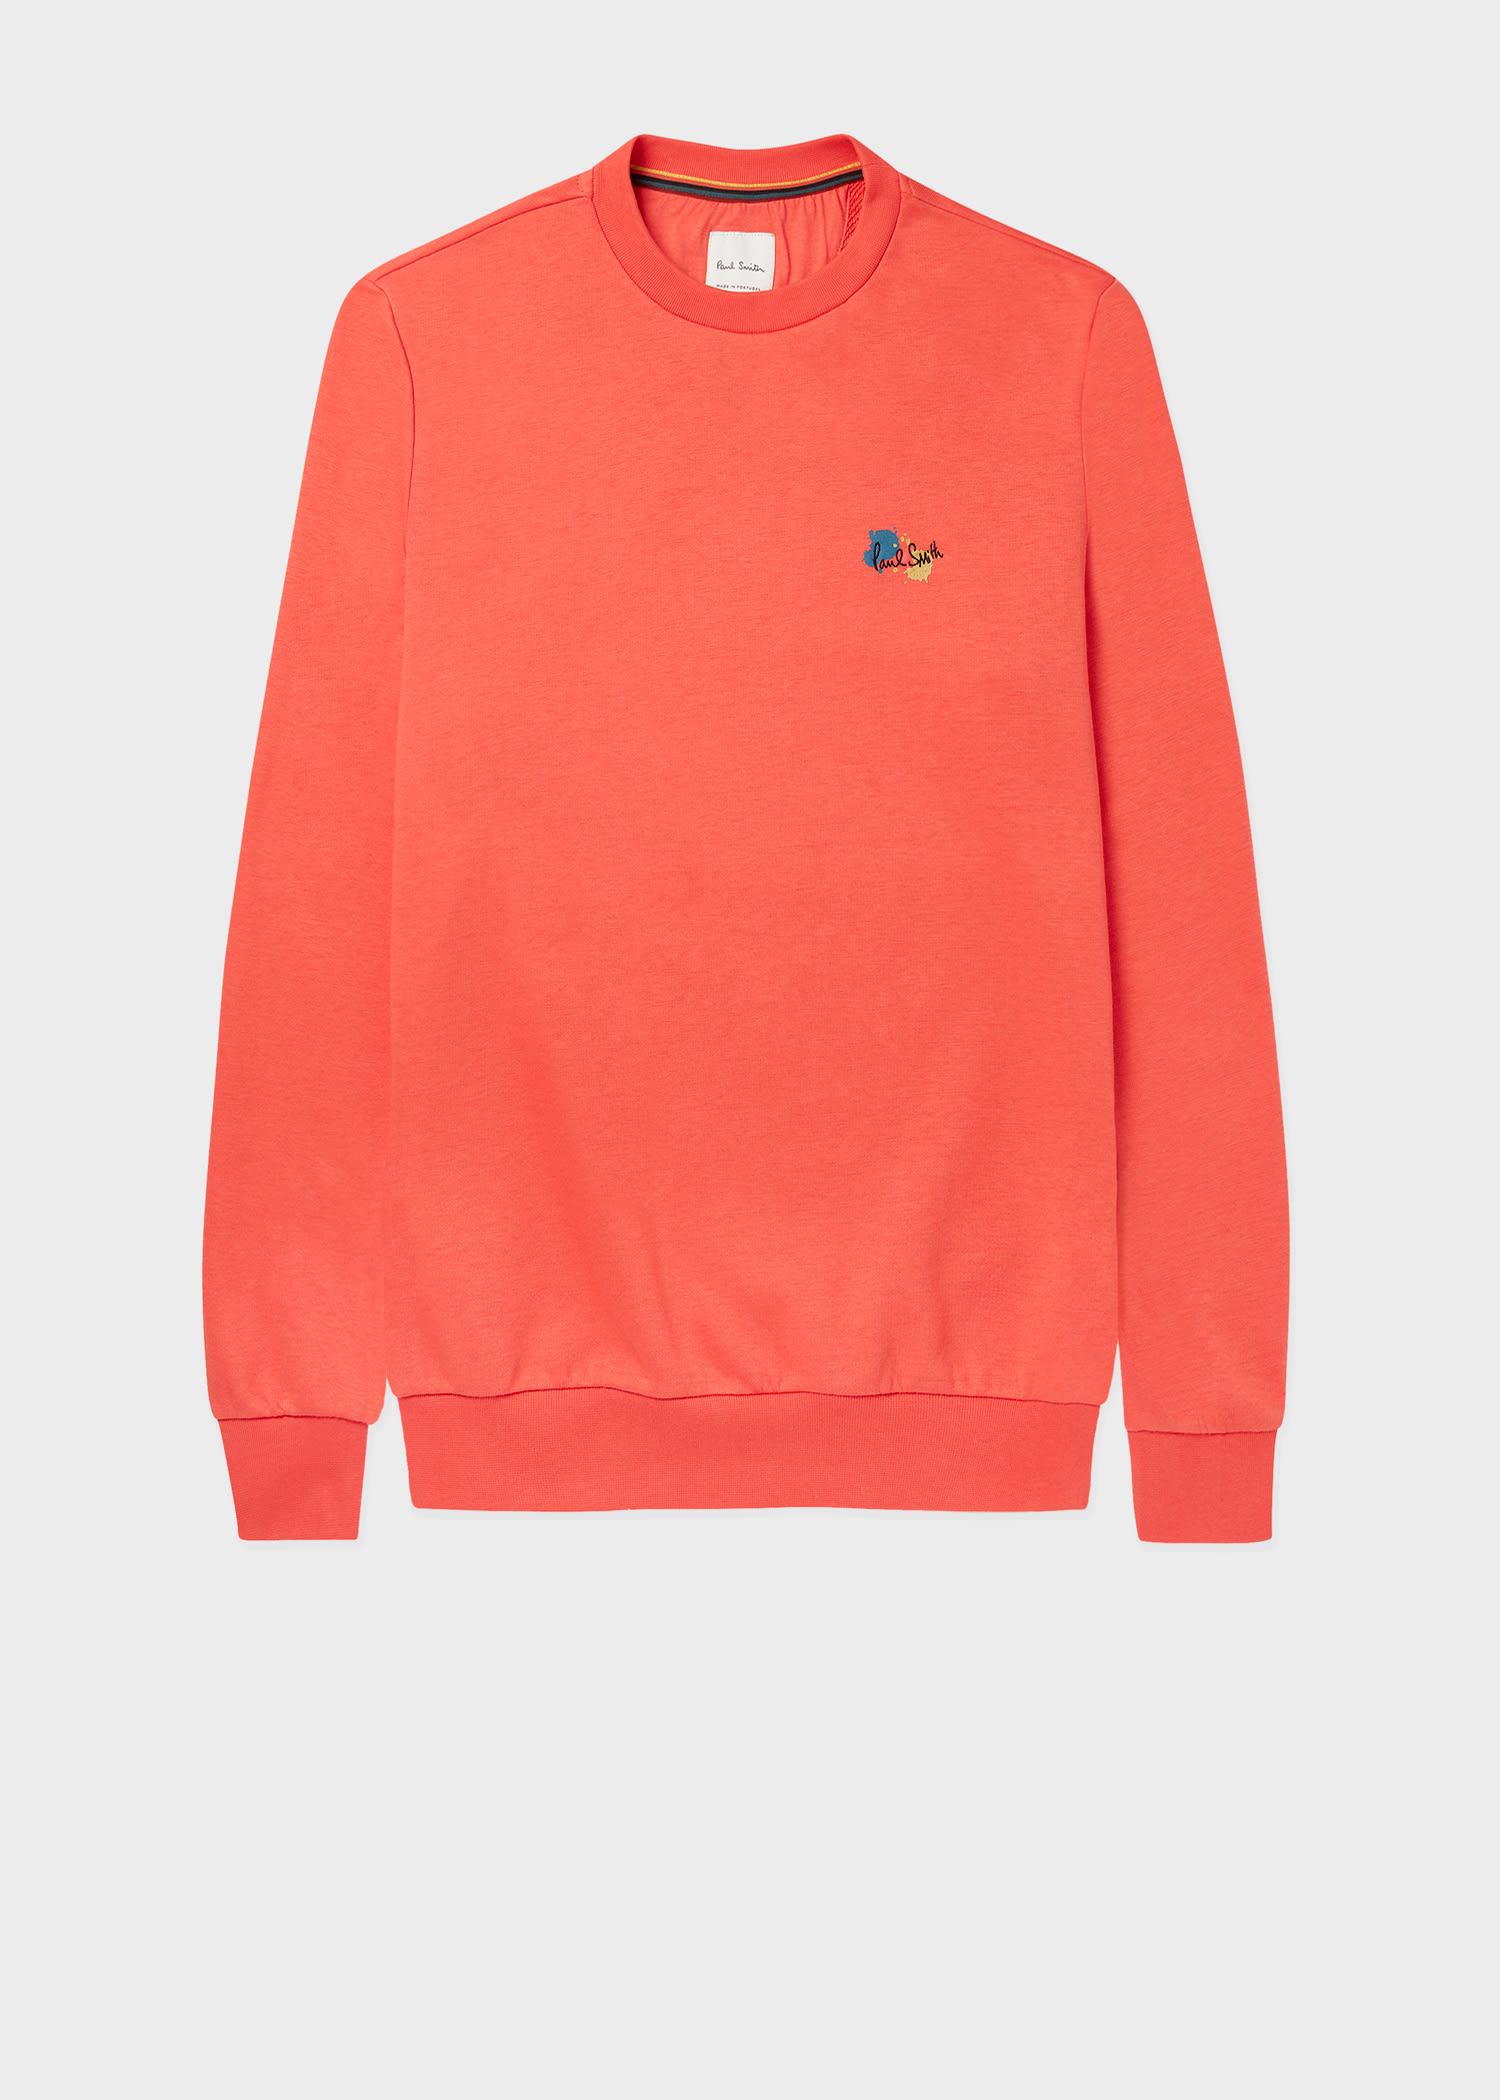 Paul Smith Skeleton Sweatshirt Outlet Online, UP TO 51% OFF | www 